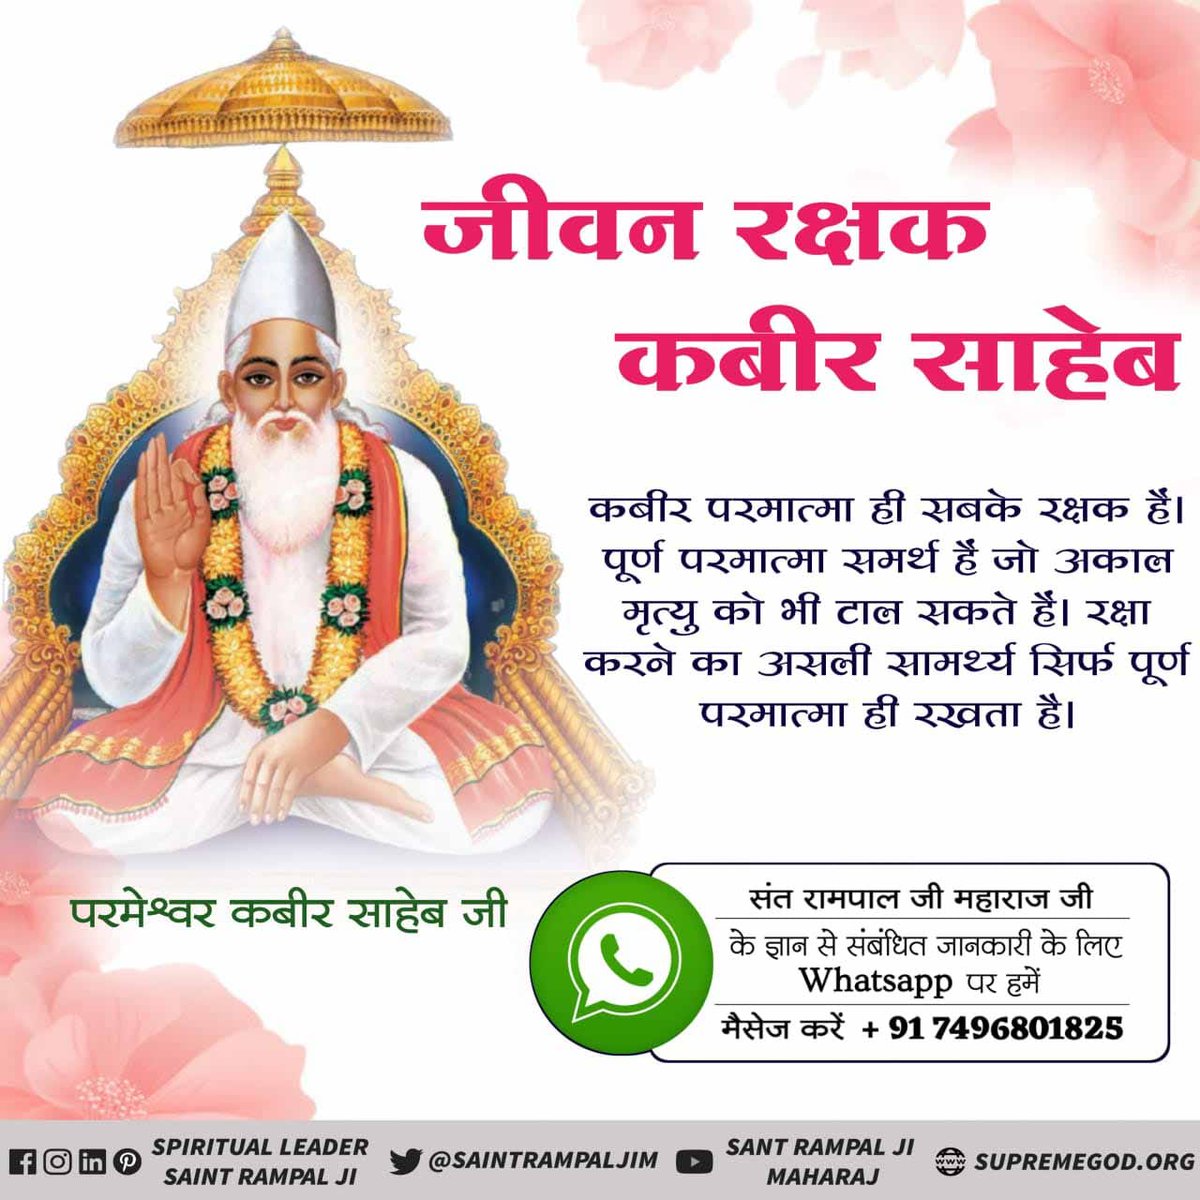 R O H I ț N A G E H Godkabir Realsavior God Is Real Saviour Of Both Brother And Sister Saintrampaljim Must Watch Sadhna Tv From 7 30pm Daily T Co R12gv0fmxp